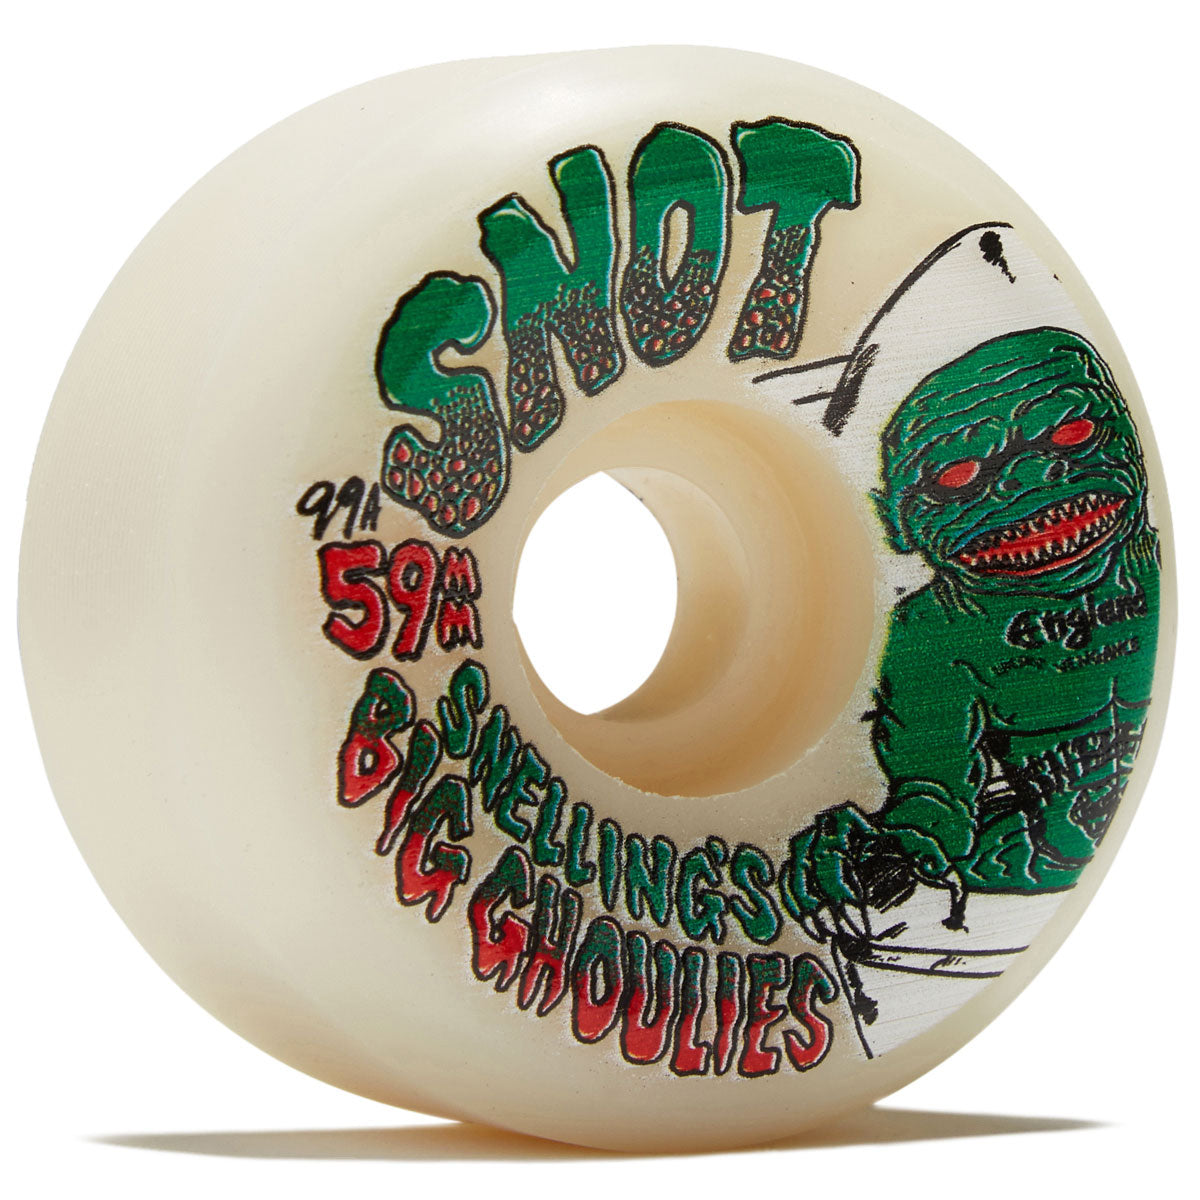 Snot Snelling Big Ghoulies 99a Skateboard Wheels - Glow In The Dark - 59mm image 1